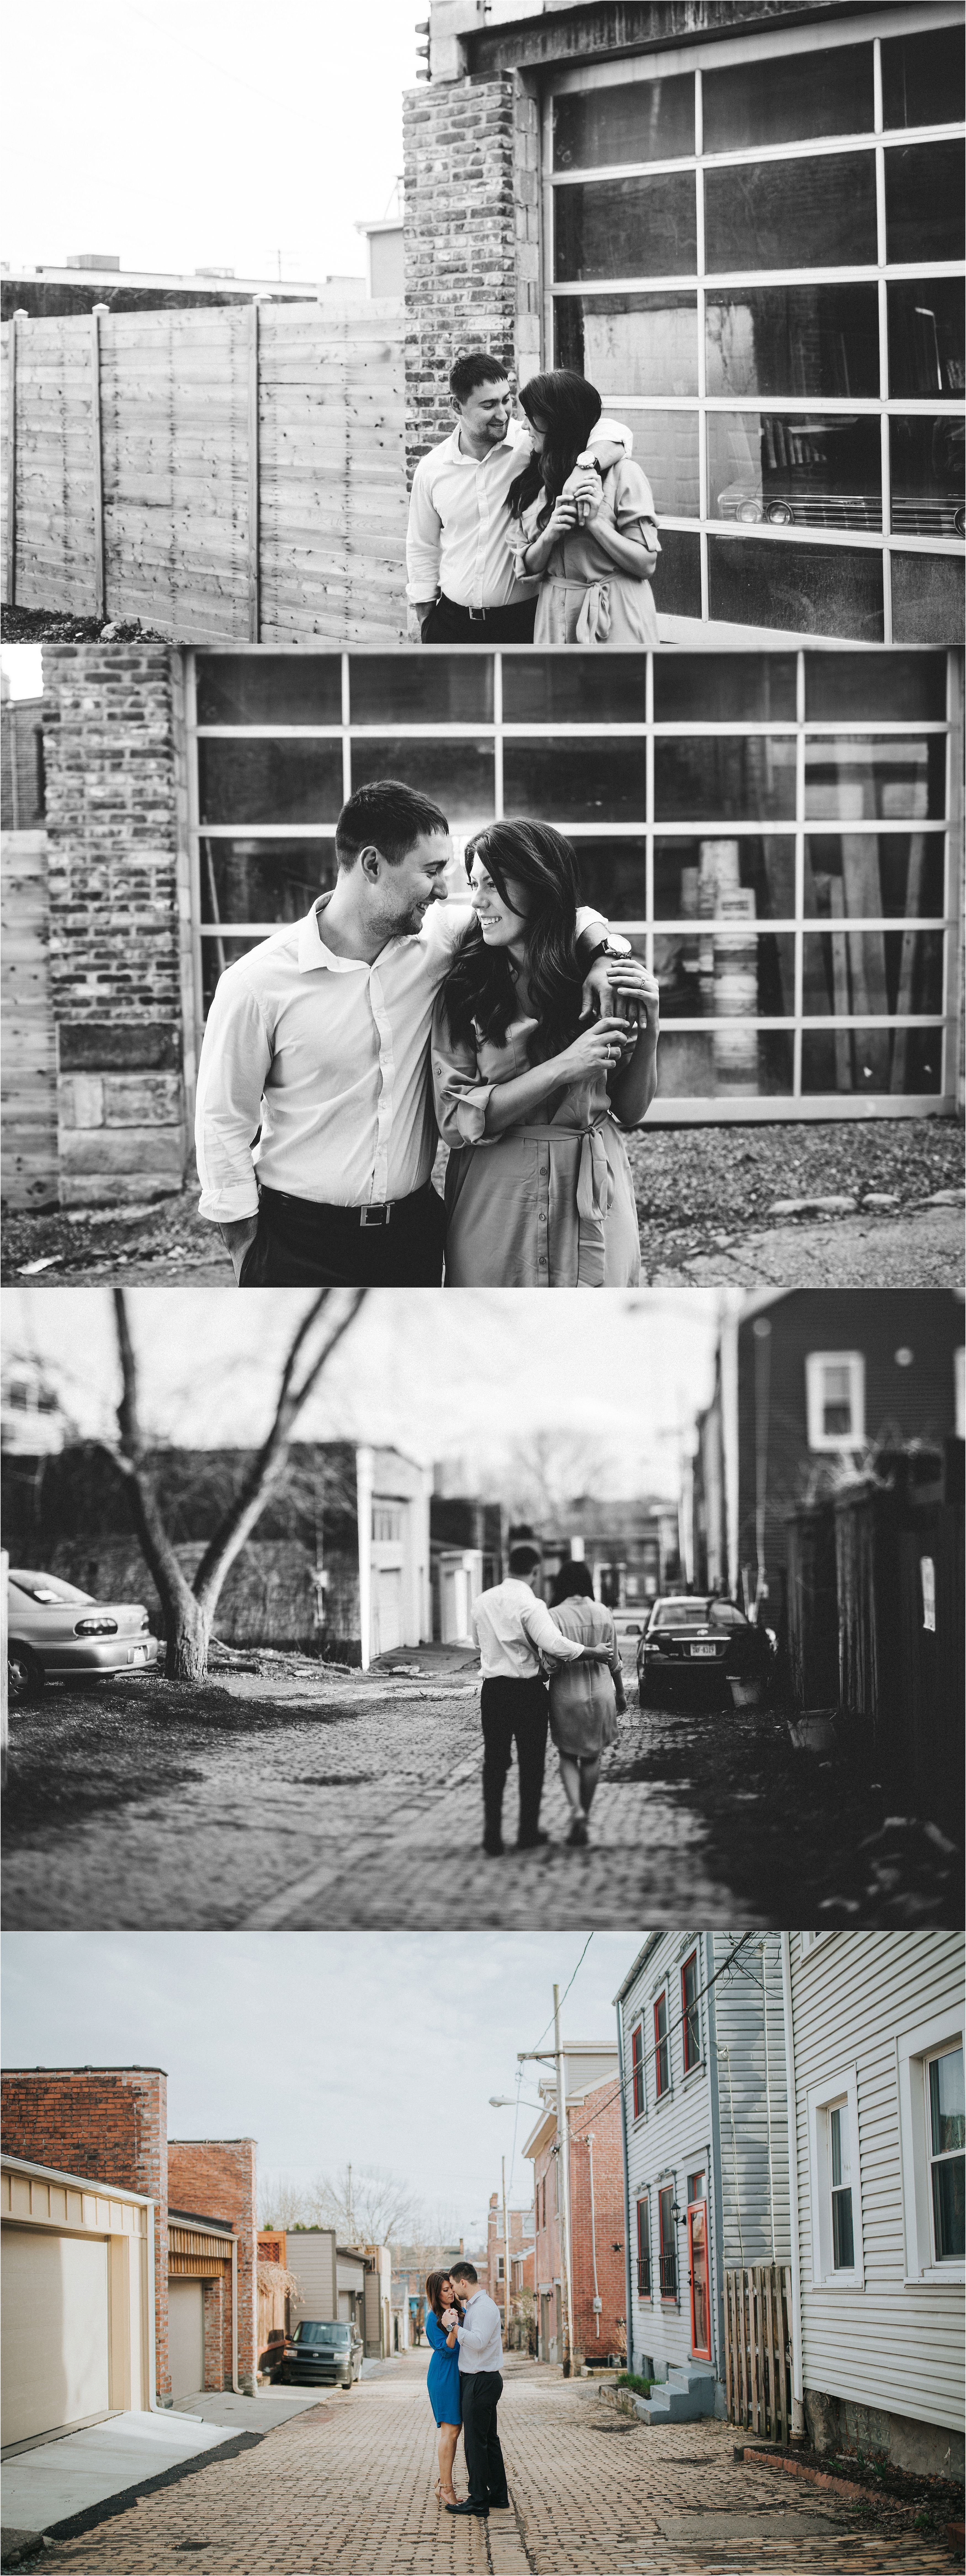 8 -mexican war streets engagement session - pittsburgh photographer - oakwood photo + video.jpg